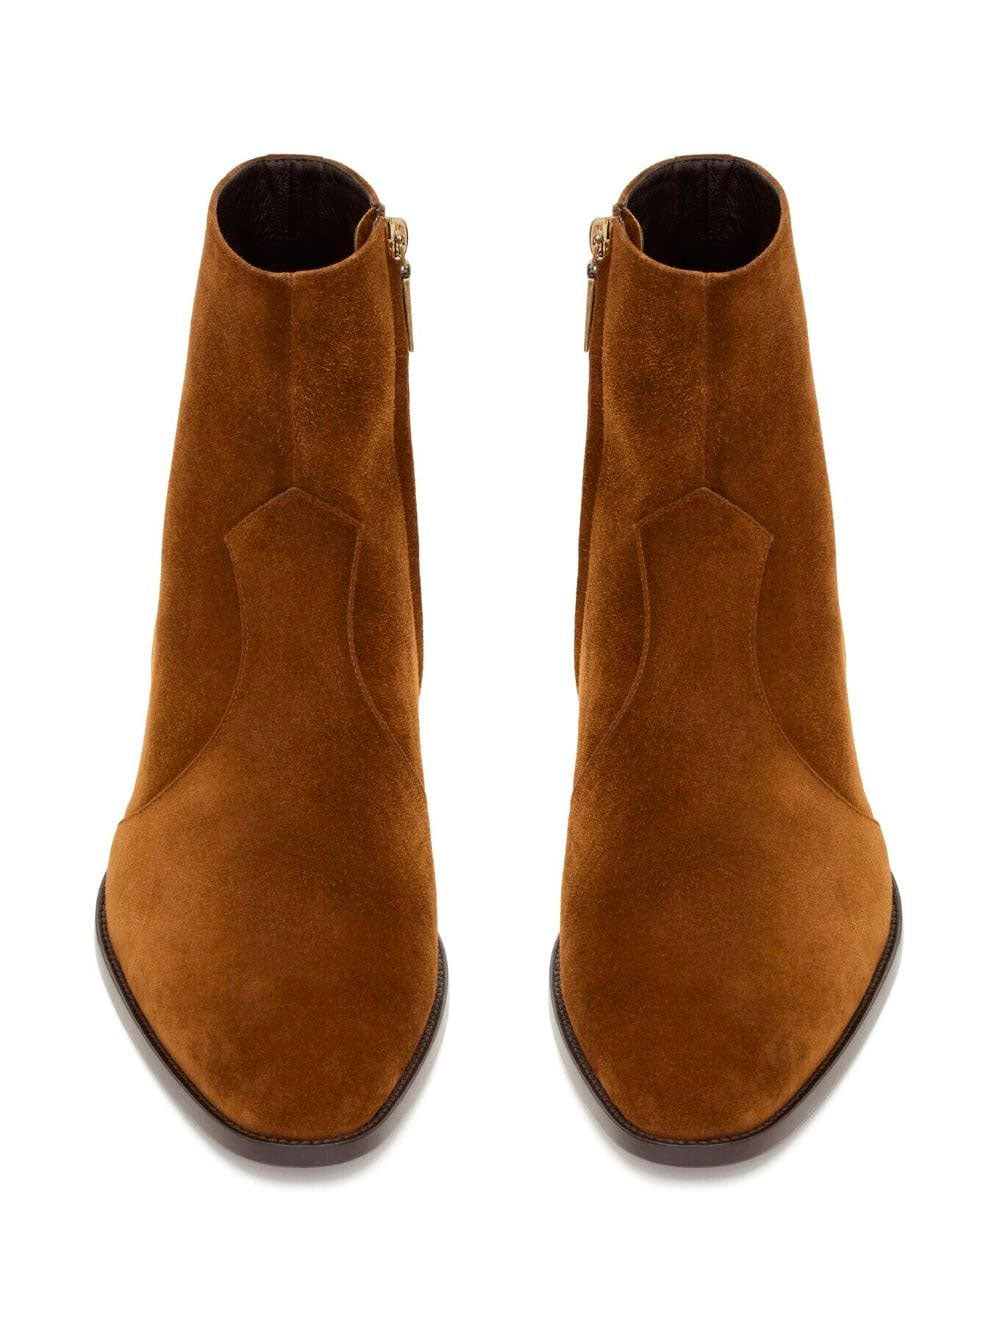 Wyatt ankle boots